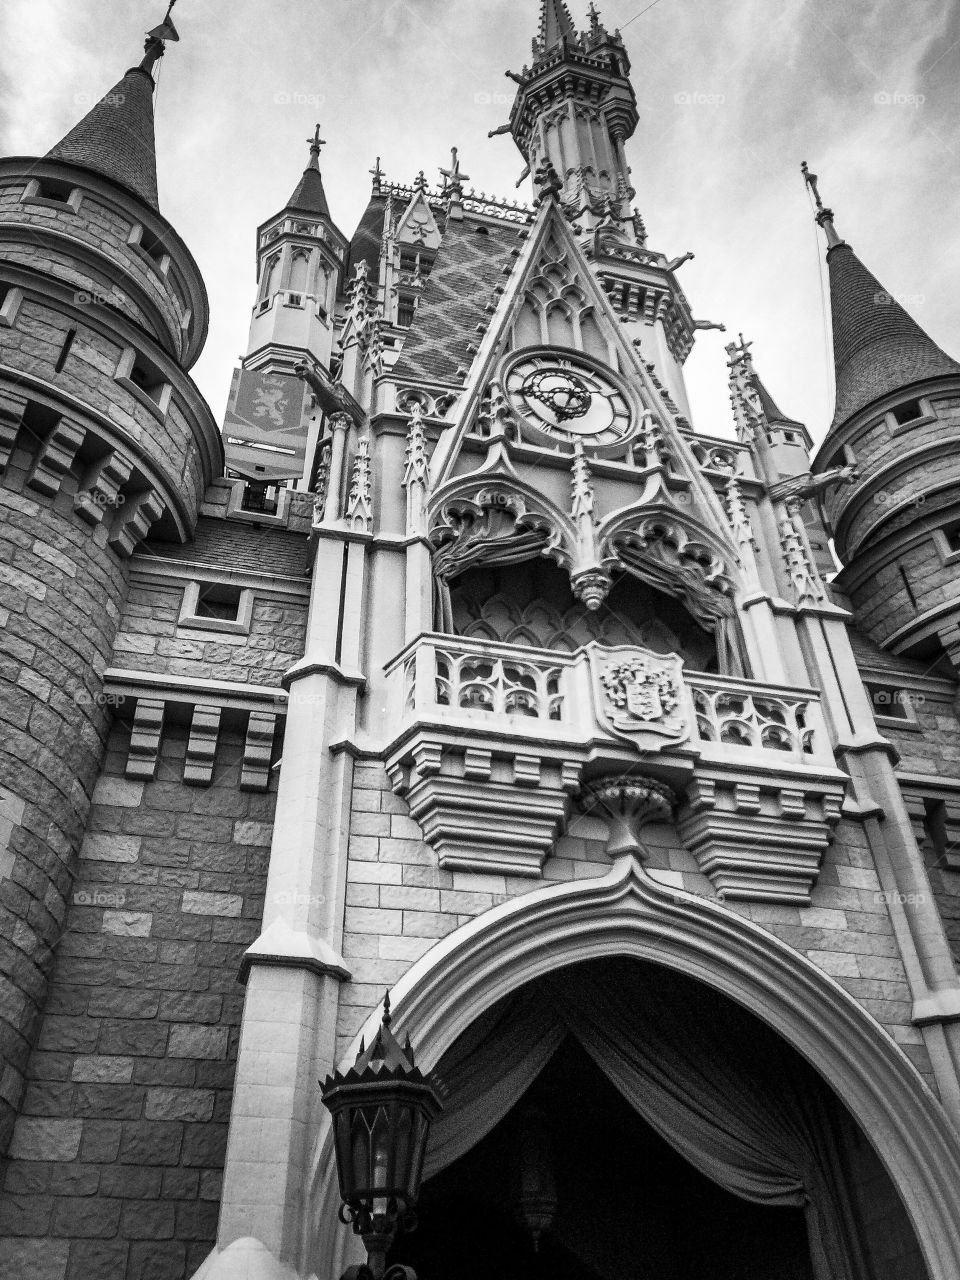 Magic kingdom castle upshot from the back side with great value and texture and strong composition 